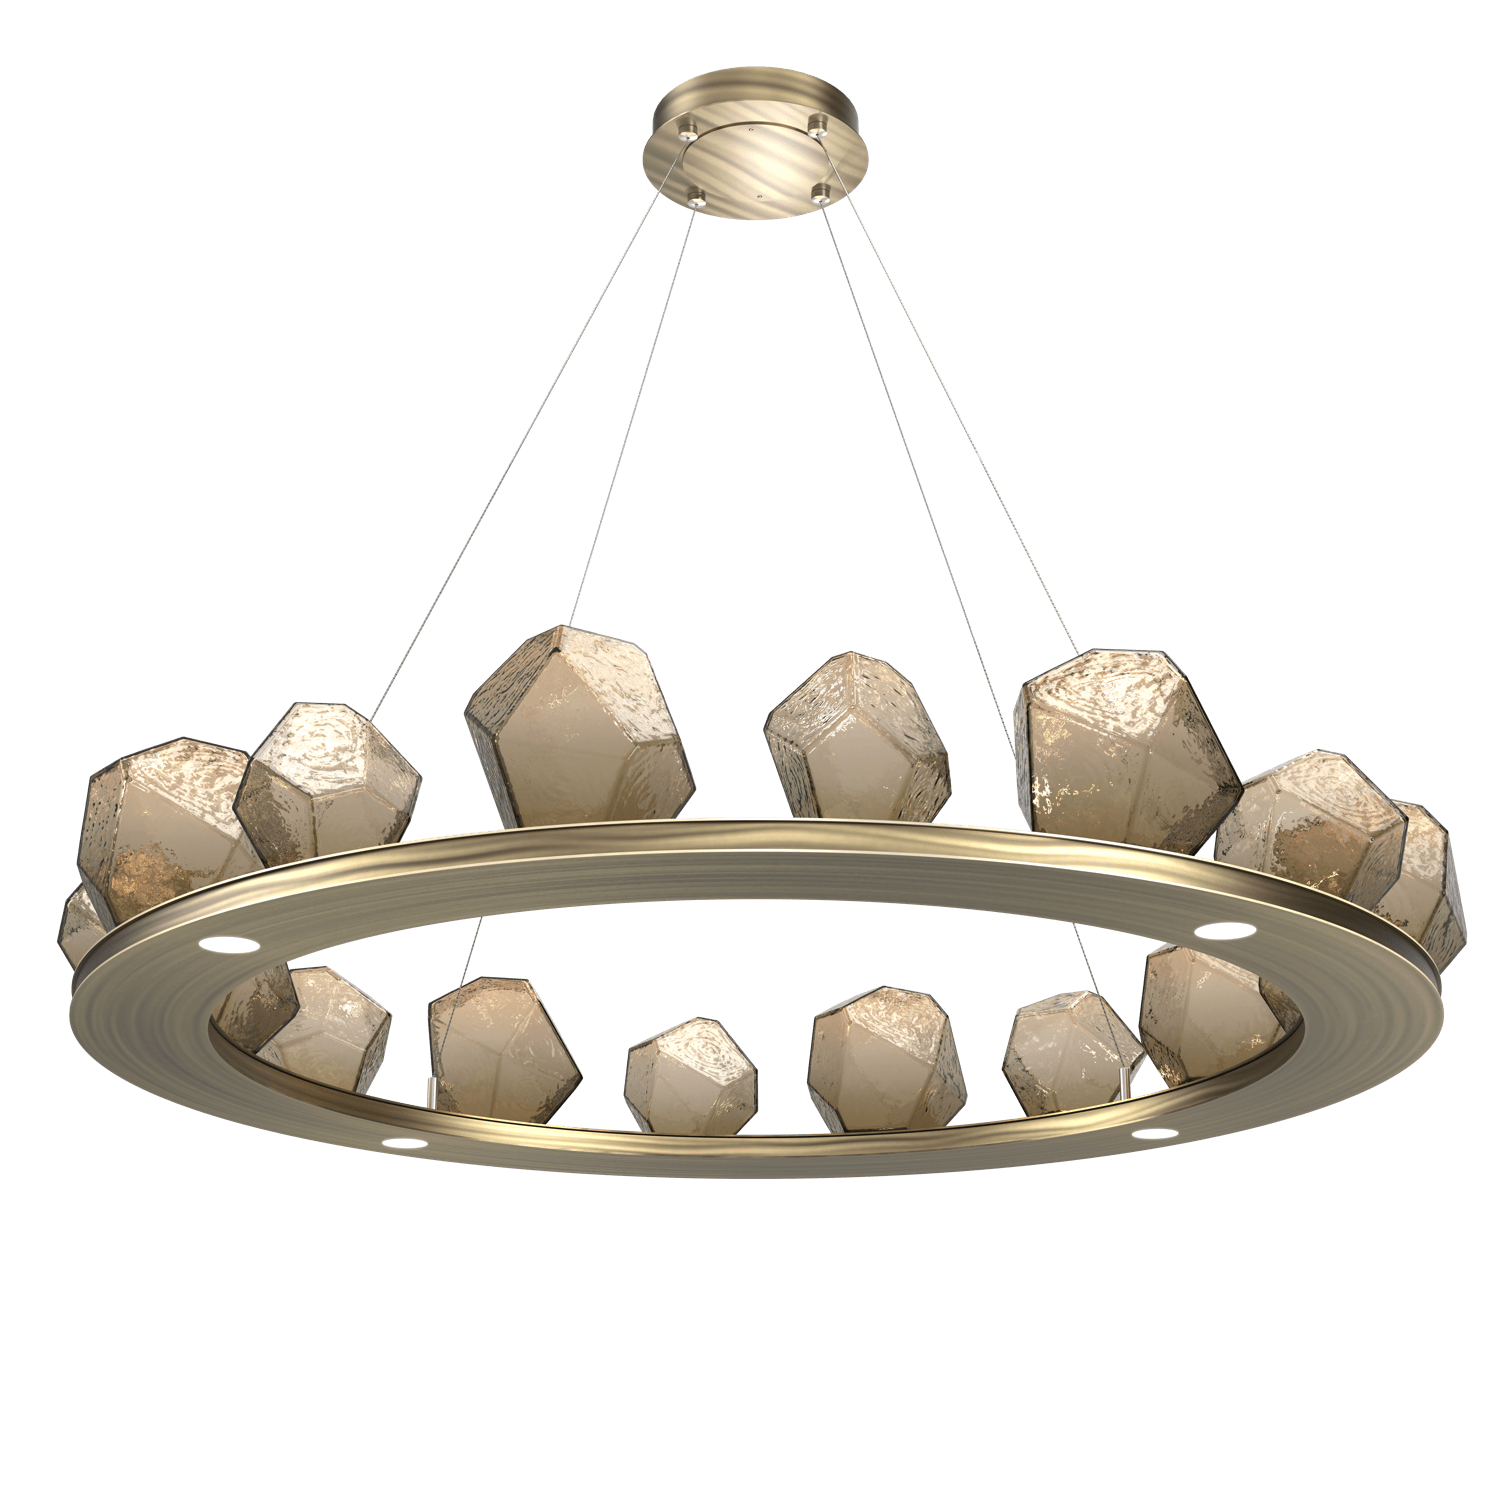 CHB0039-0D-HB-B-Hammerton-Studio-Gem-48-inch-ring-chandelier-with-heritage-brass-finish-and-bronze-blown-glass-shades-and-LED-lamping